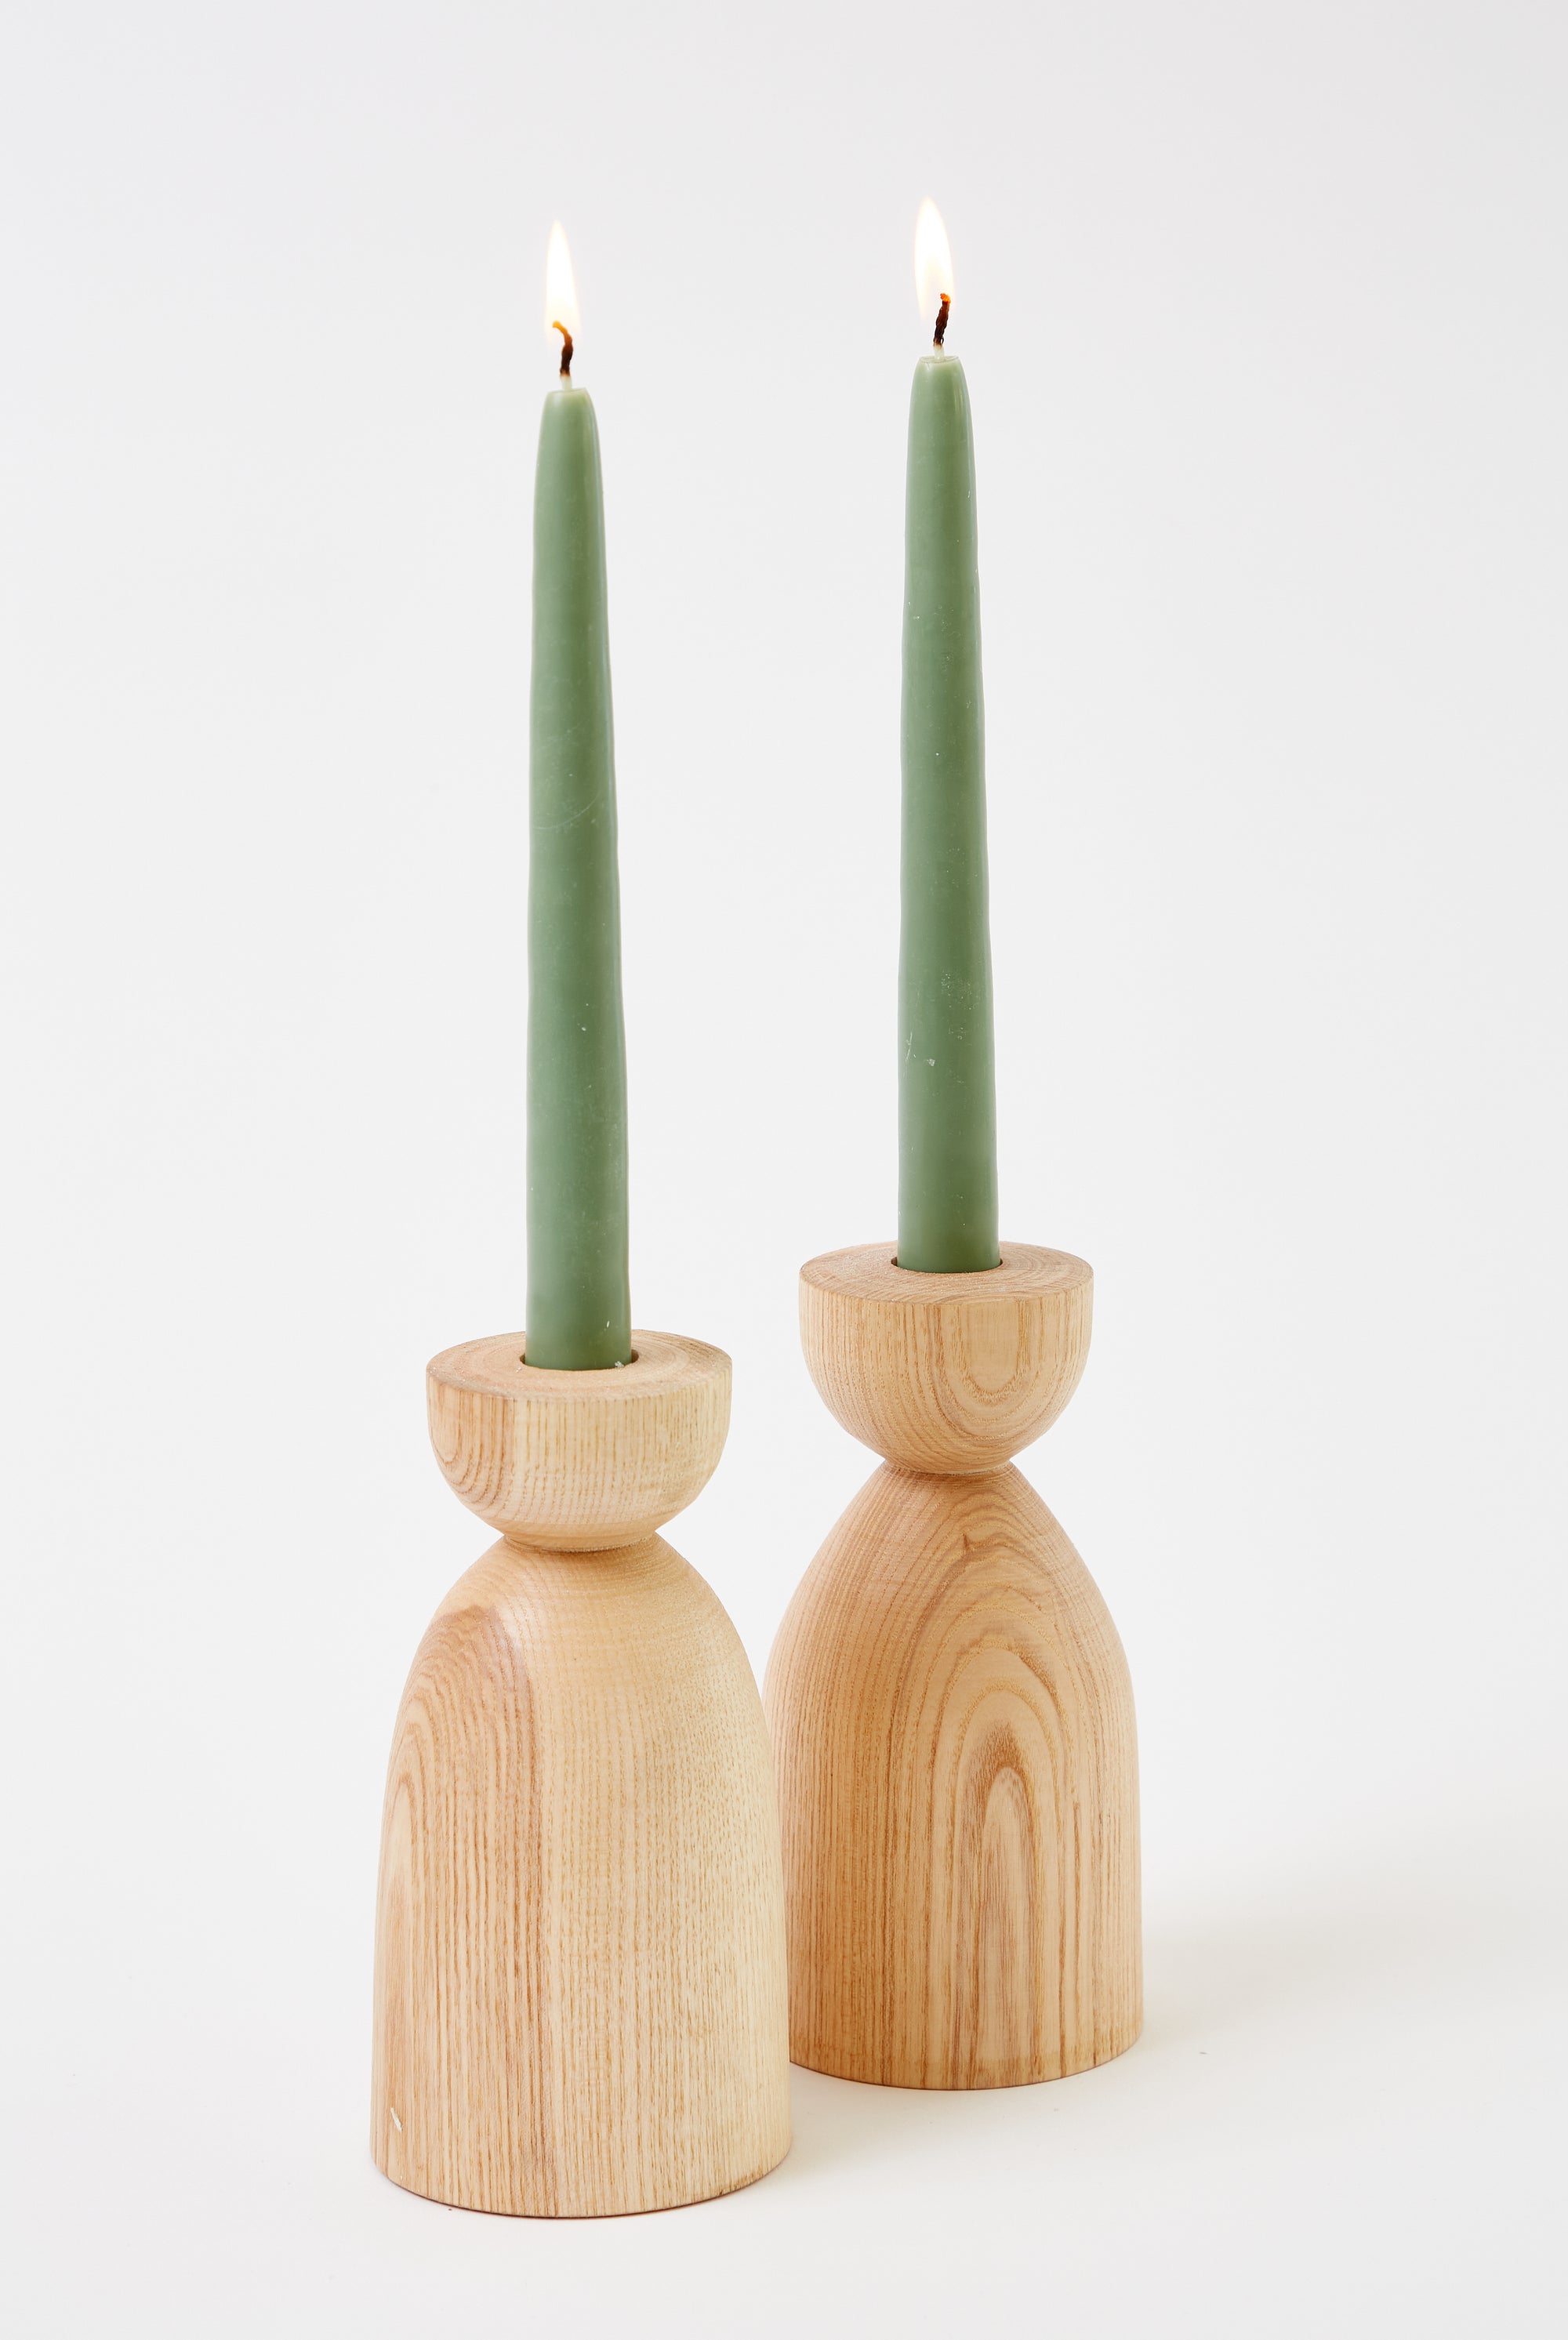 Alex Walshaw Set of Tall Candlesticks in Natural